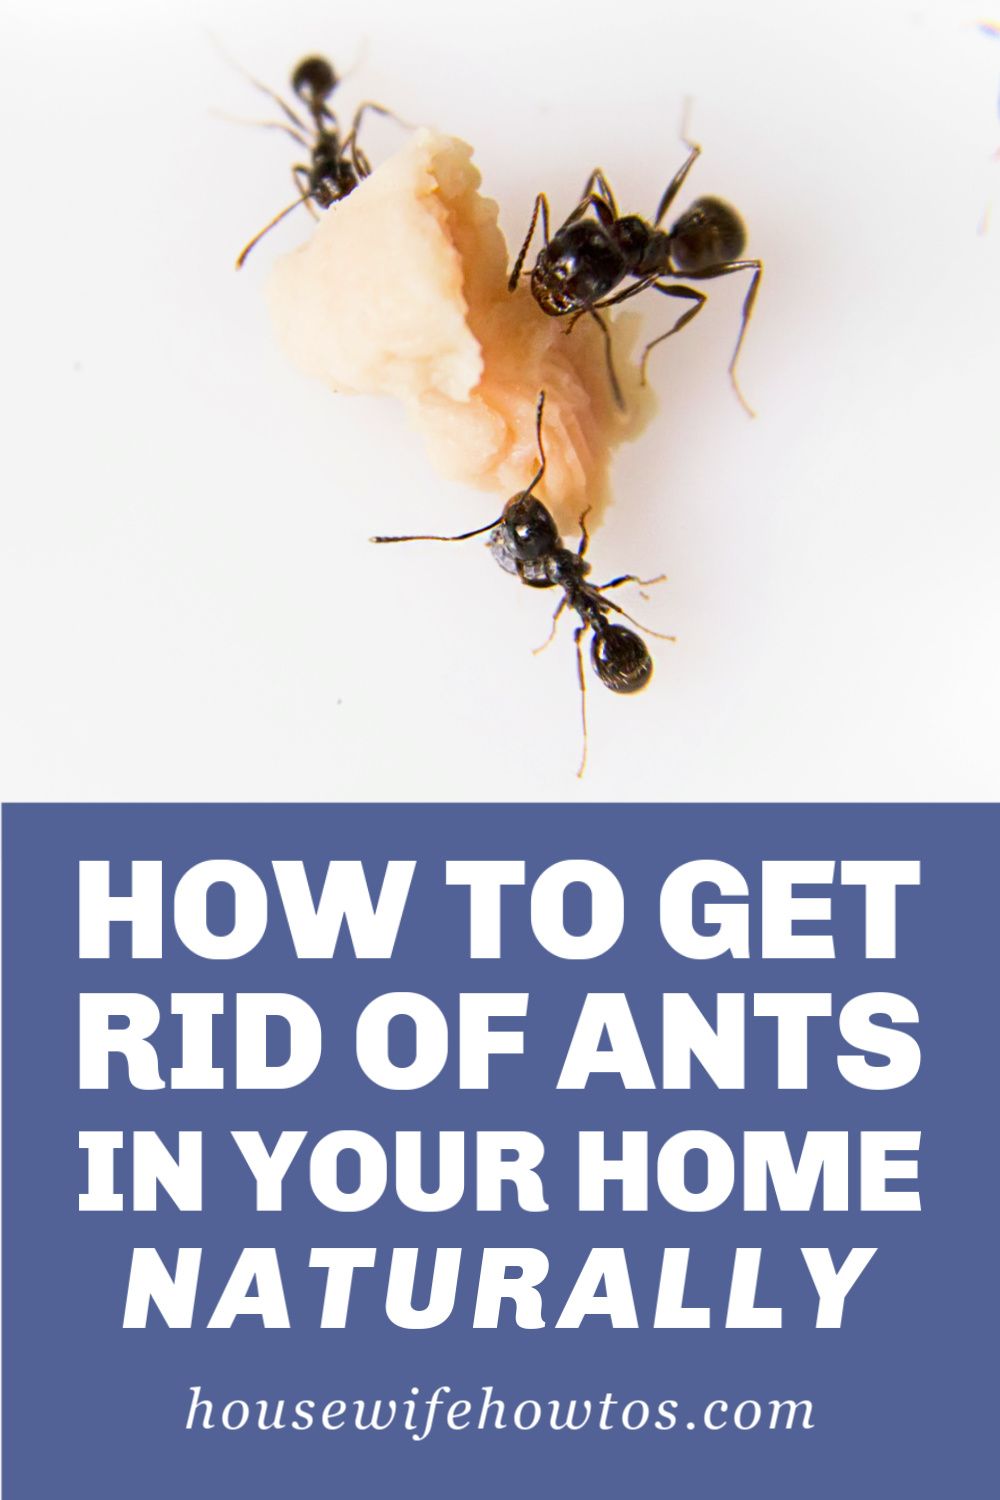 Home Remedies to Get Rid of Ants